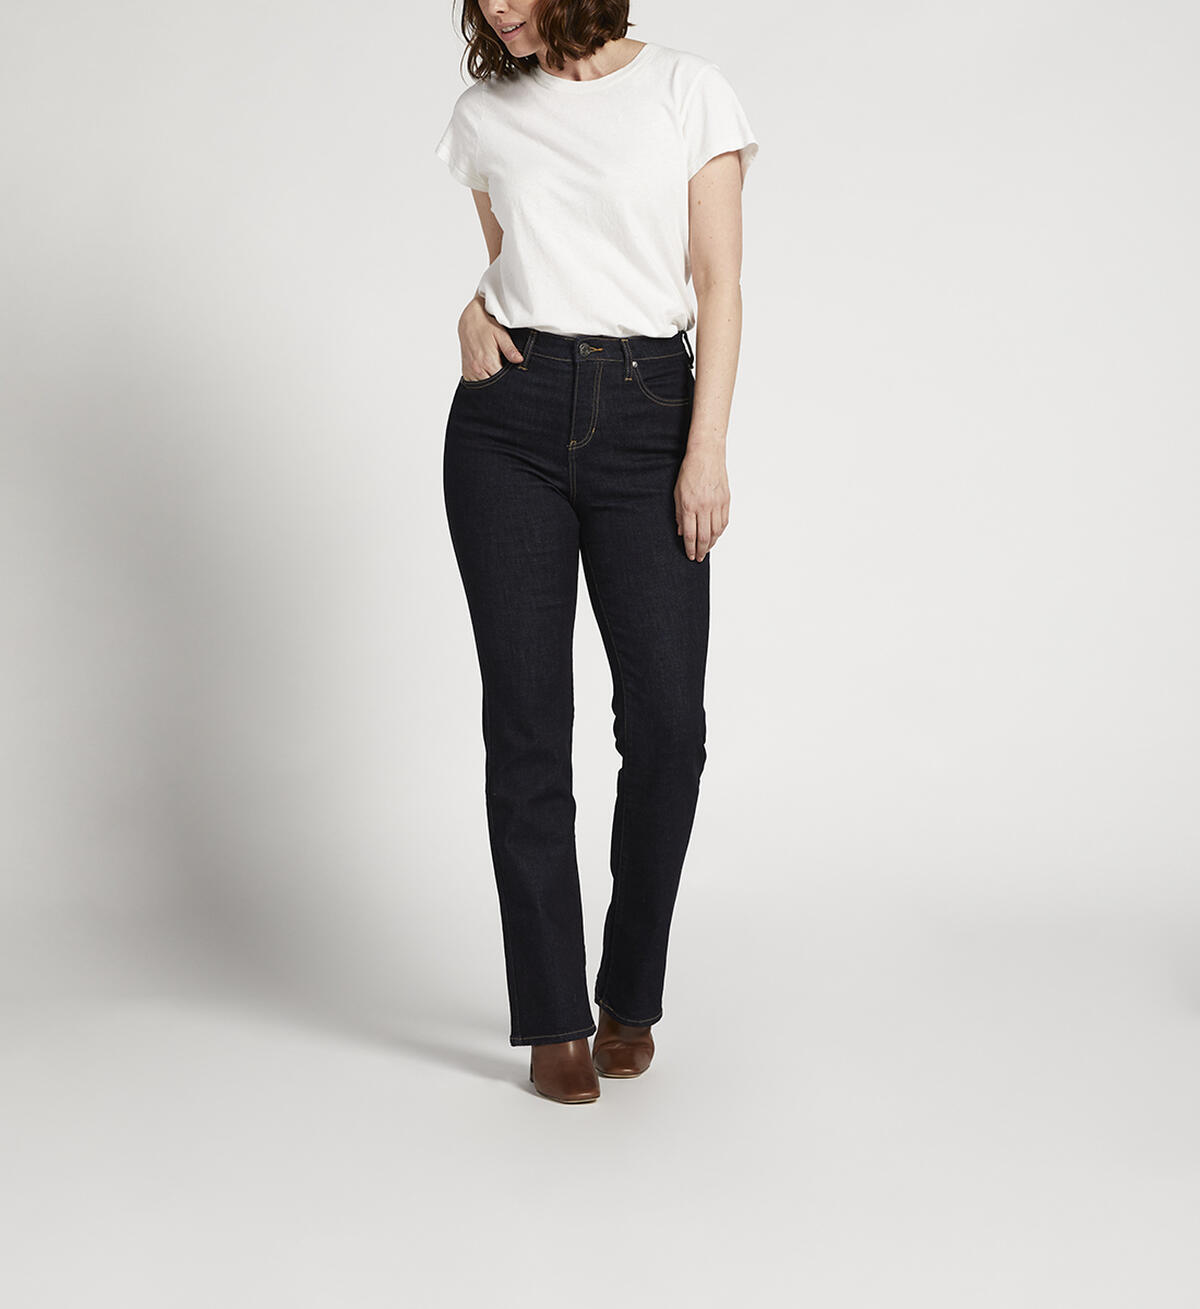 Phoebe High Rise Bootcut Jeans, , hi-res image number 0